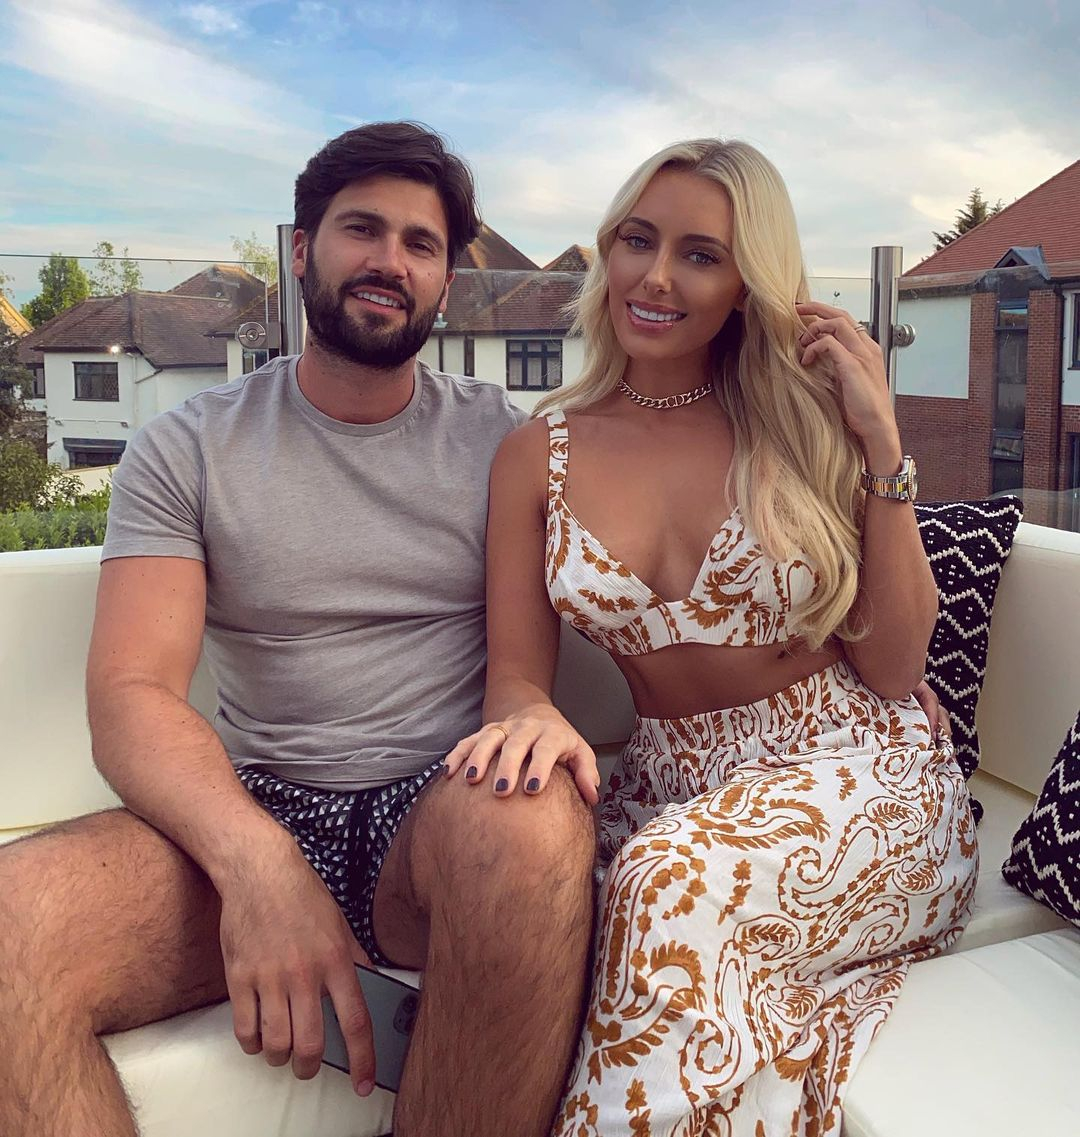 Towie’s Amber Turner shows ex Dan Edgar what he’s missing as she poses in white see-through dress